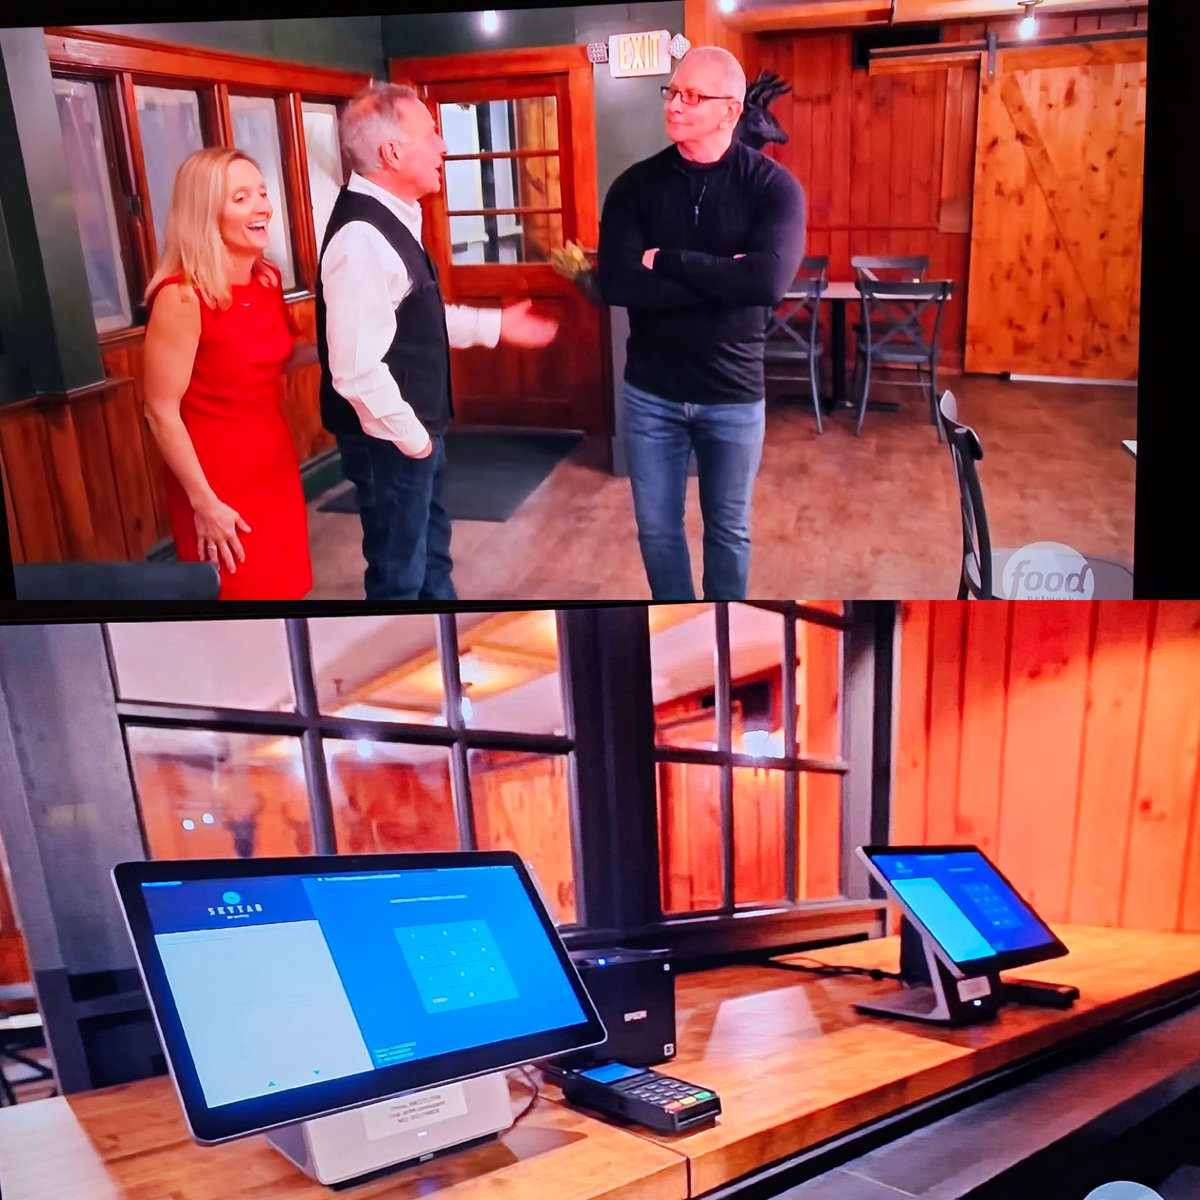 Here is the new look at the Dutch Treat in Franconia, NH. Great job by Lynn Kegan & @TomBury1
This can't be the end of  #RestaurantImpossible, right @FoodNetwork? We've got more work to do with @RobertIrvine #TeamIrvine #LetsGetToWork